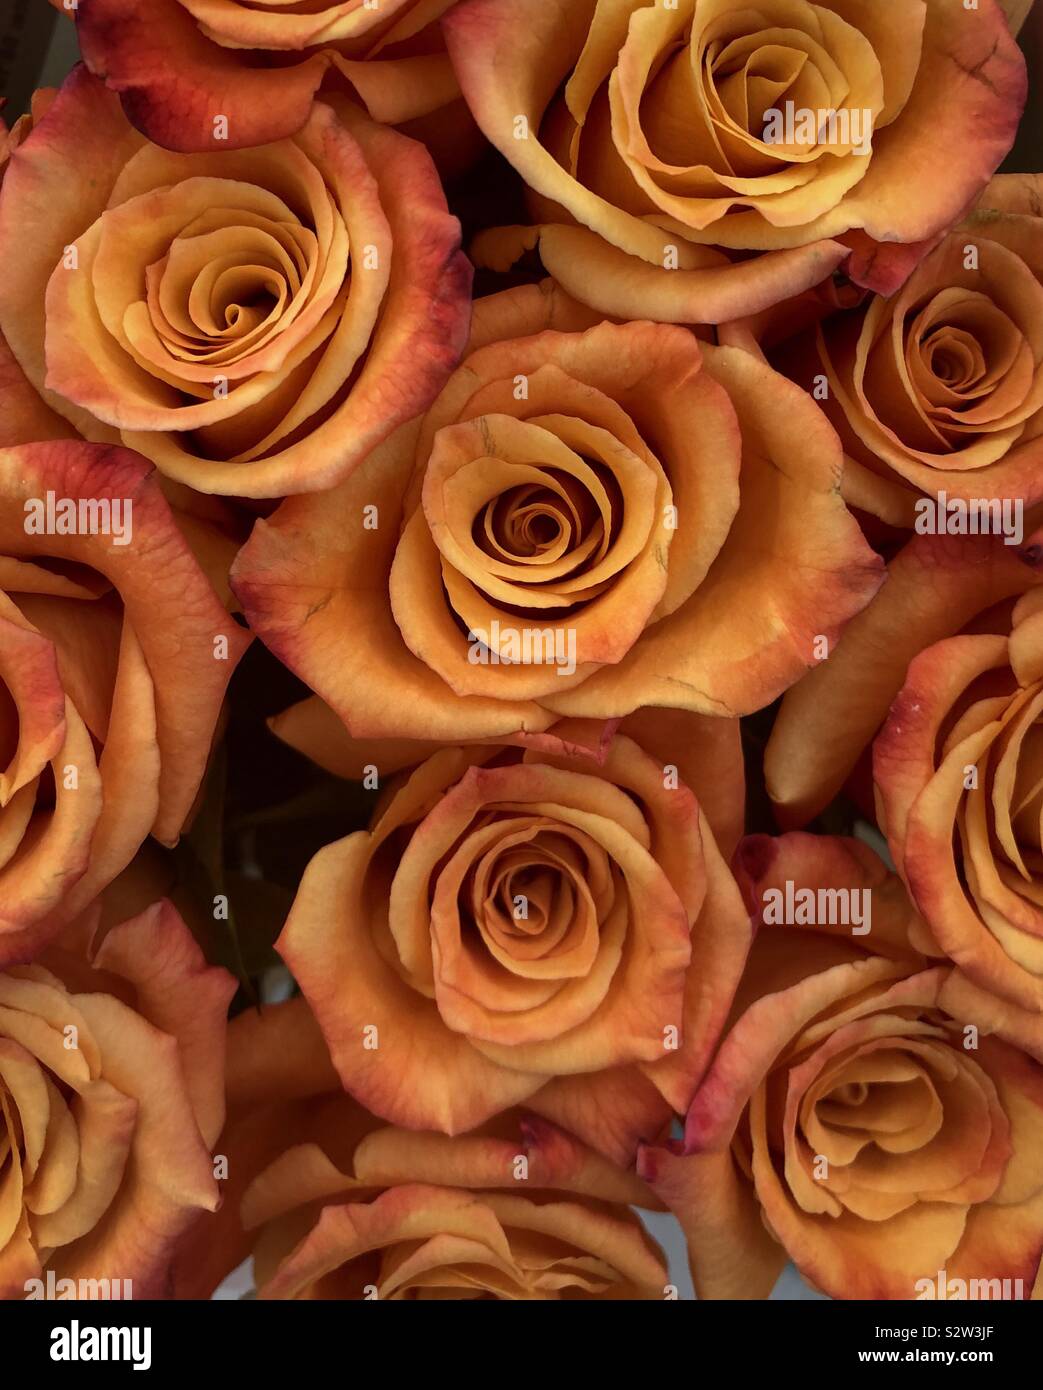 Close view of peach colored long stem roses. Stock Photo